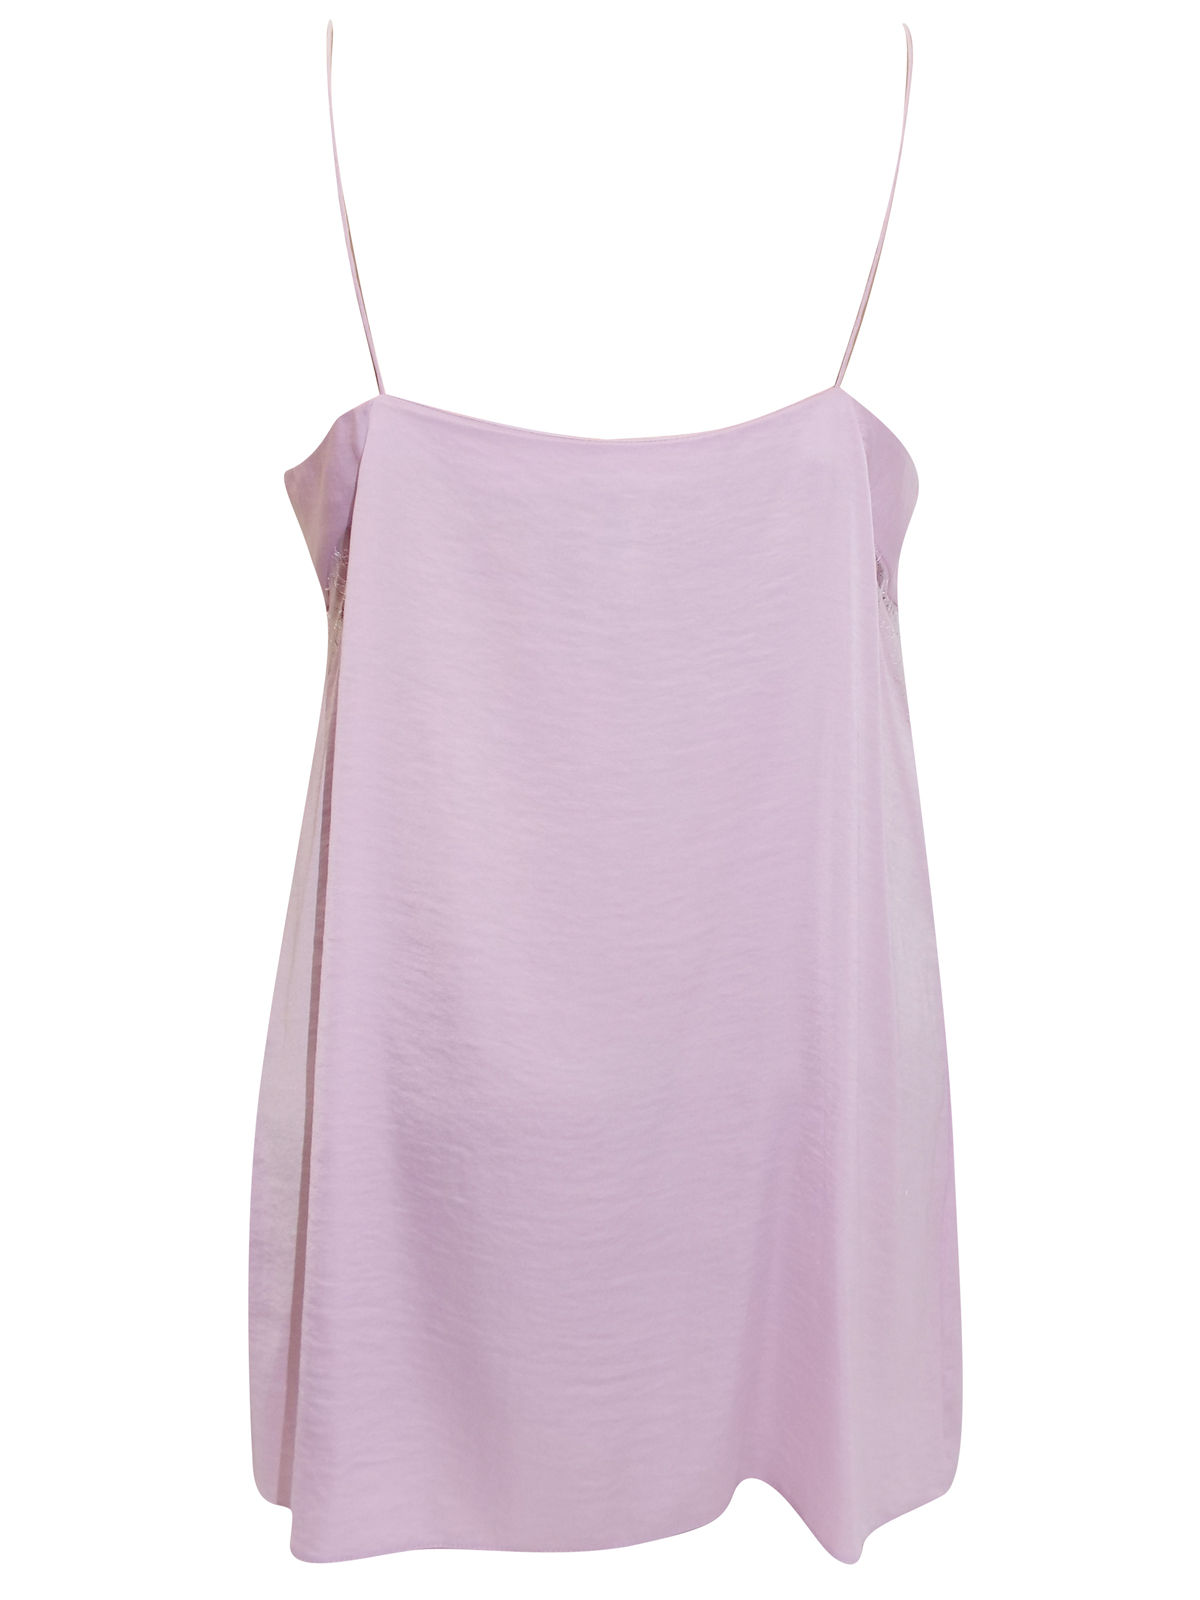 ASOS LILAC Satin & Lace Strappy Chemise - Plus Size 20 to 28